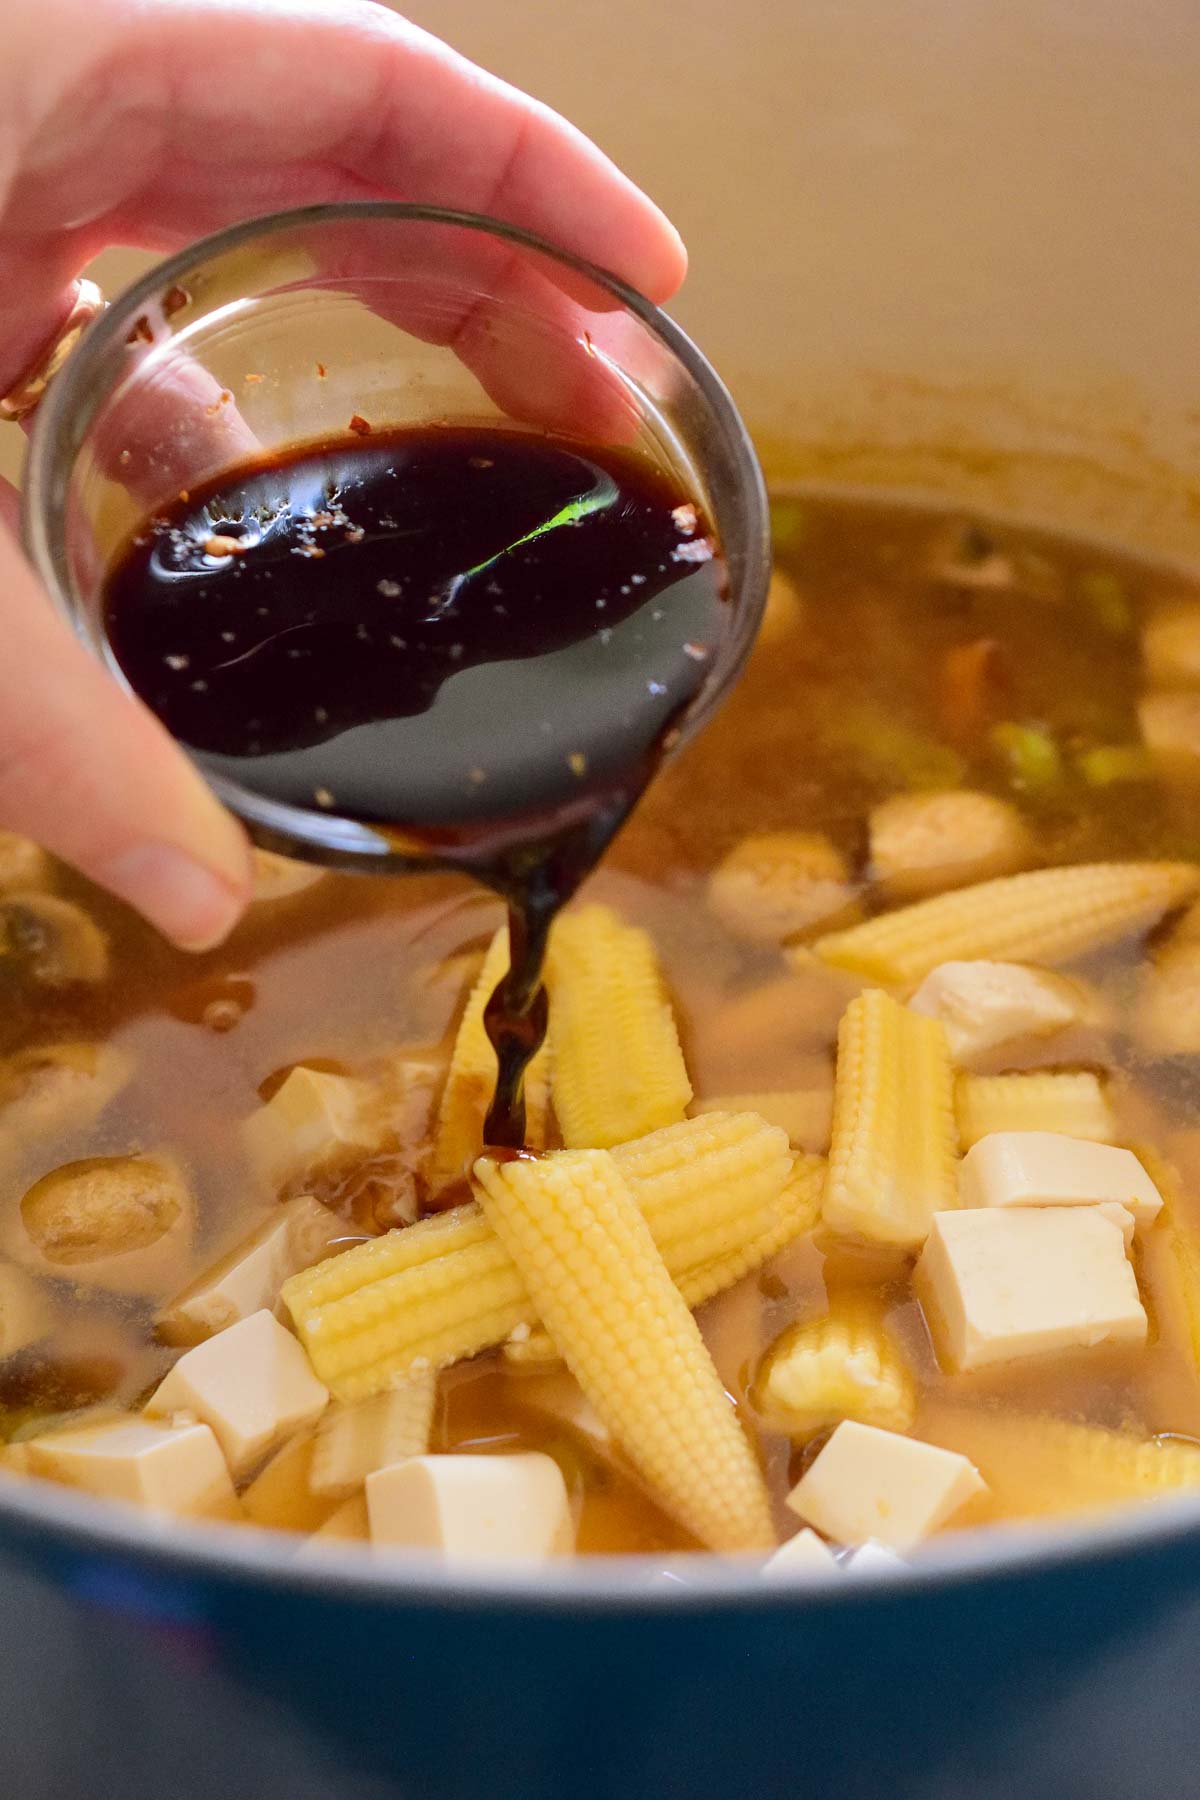 Pouring soy sauce from a small glass bowl into the soup pot.